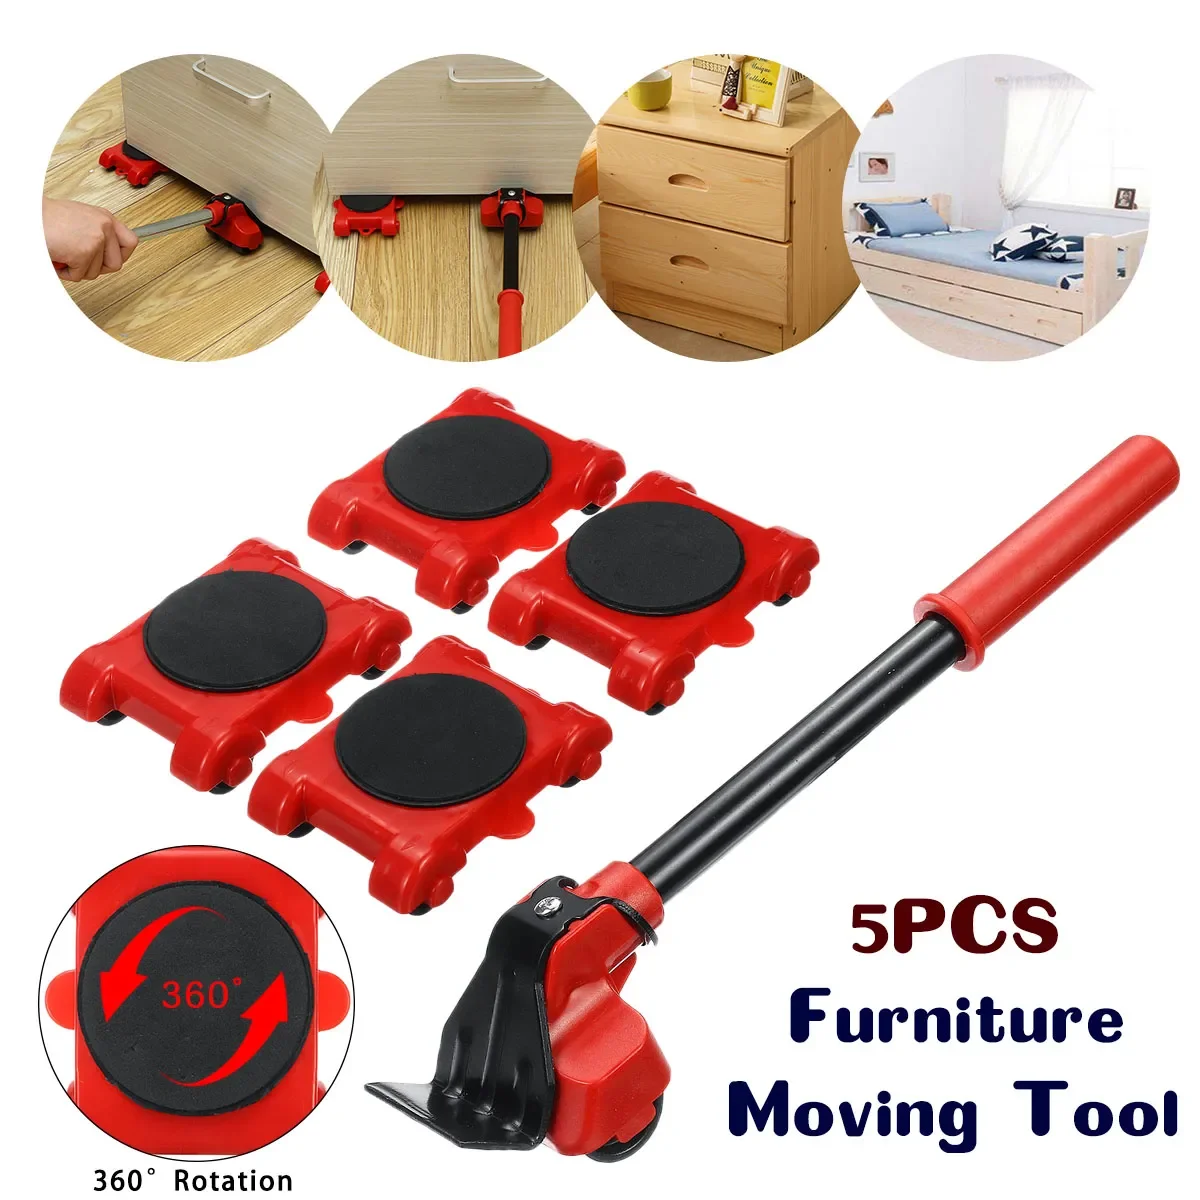 

5pcs set Furniture Lifter Heavy Duty Furniture Mover Transport Moving System 4 Move Roller 1 Wheel Bar Lifting Hand Tool Set